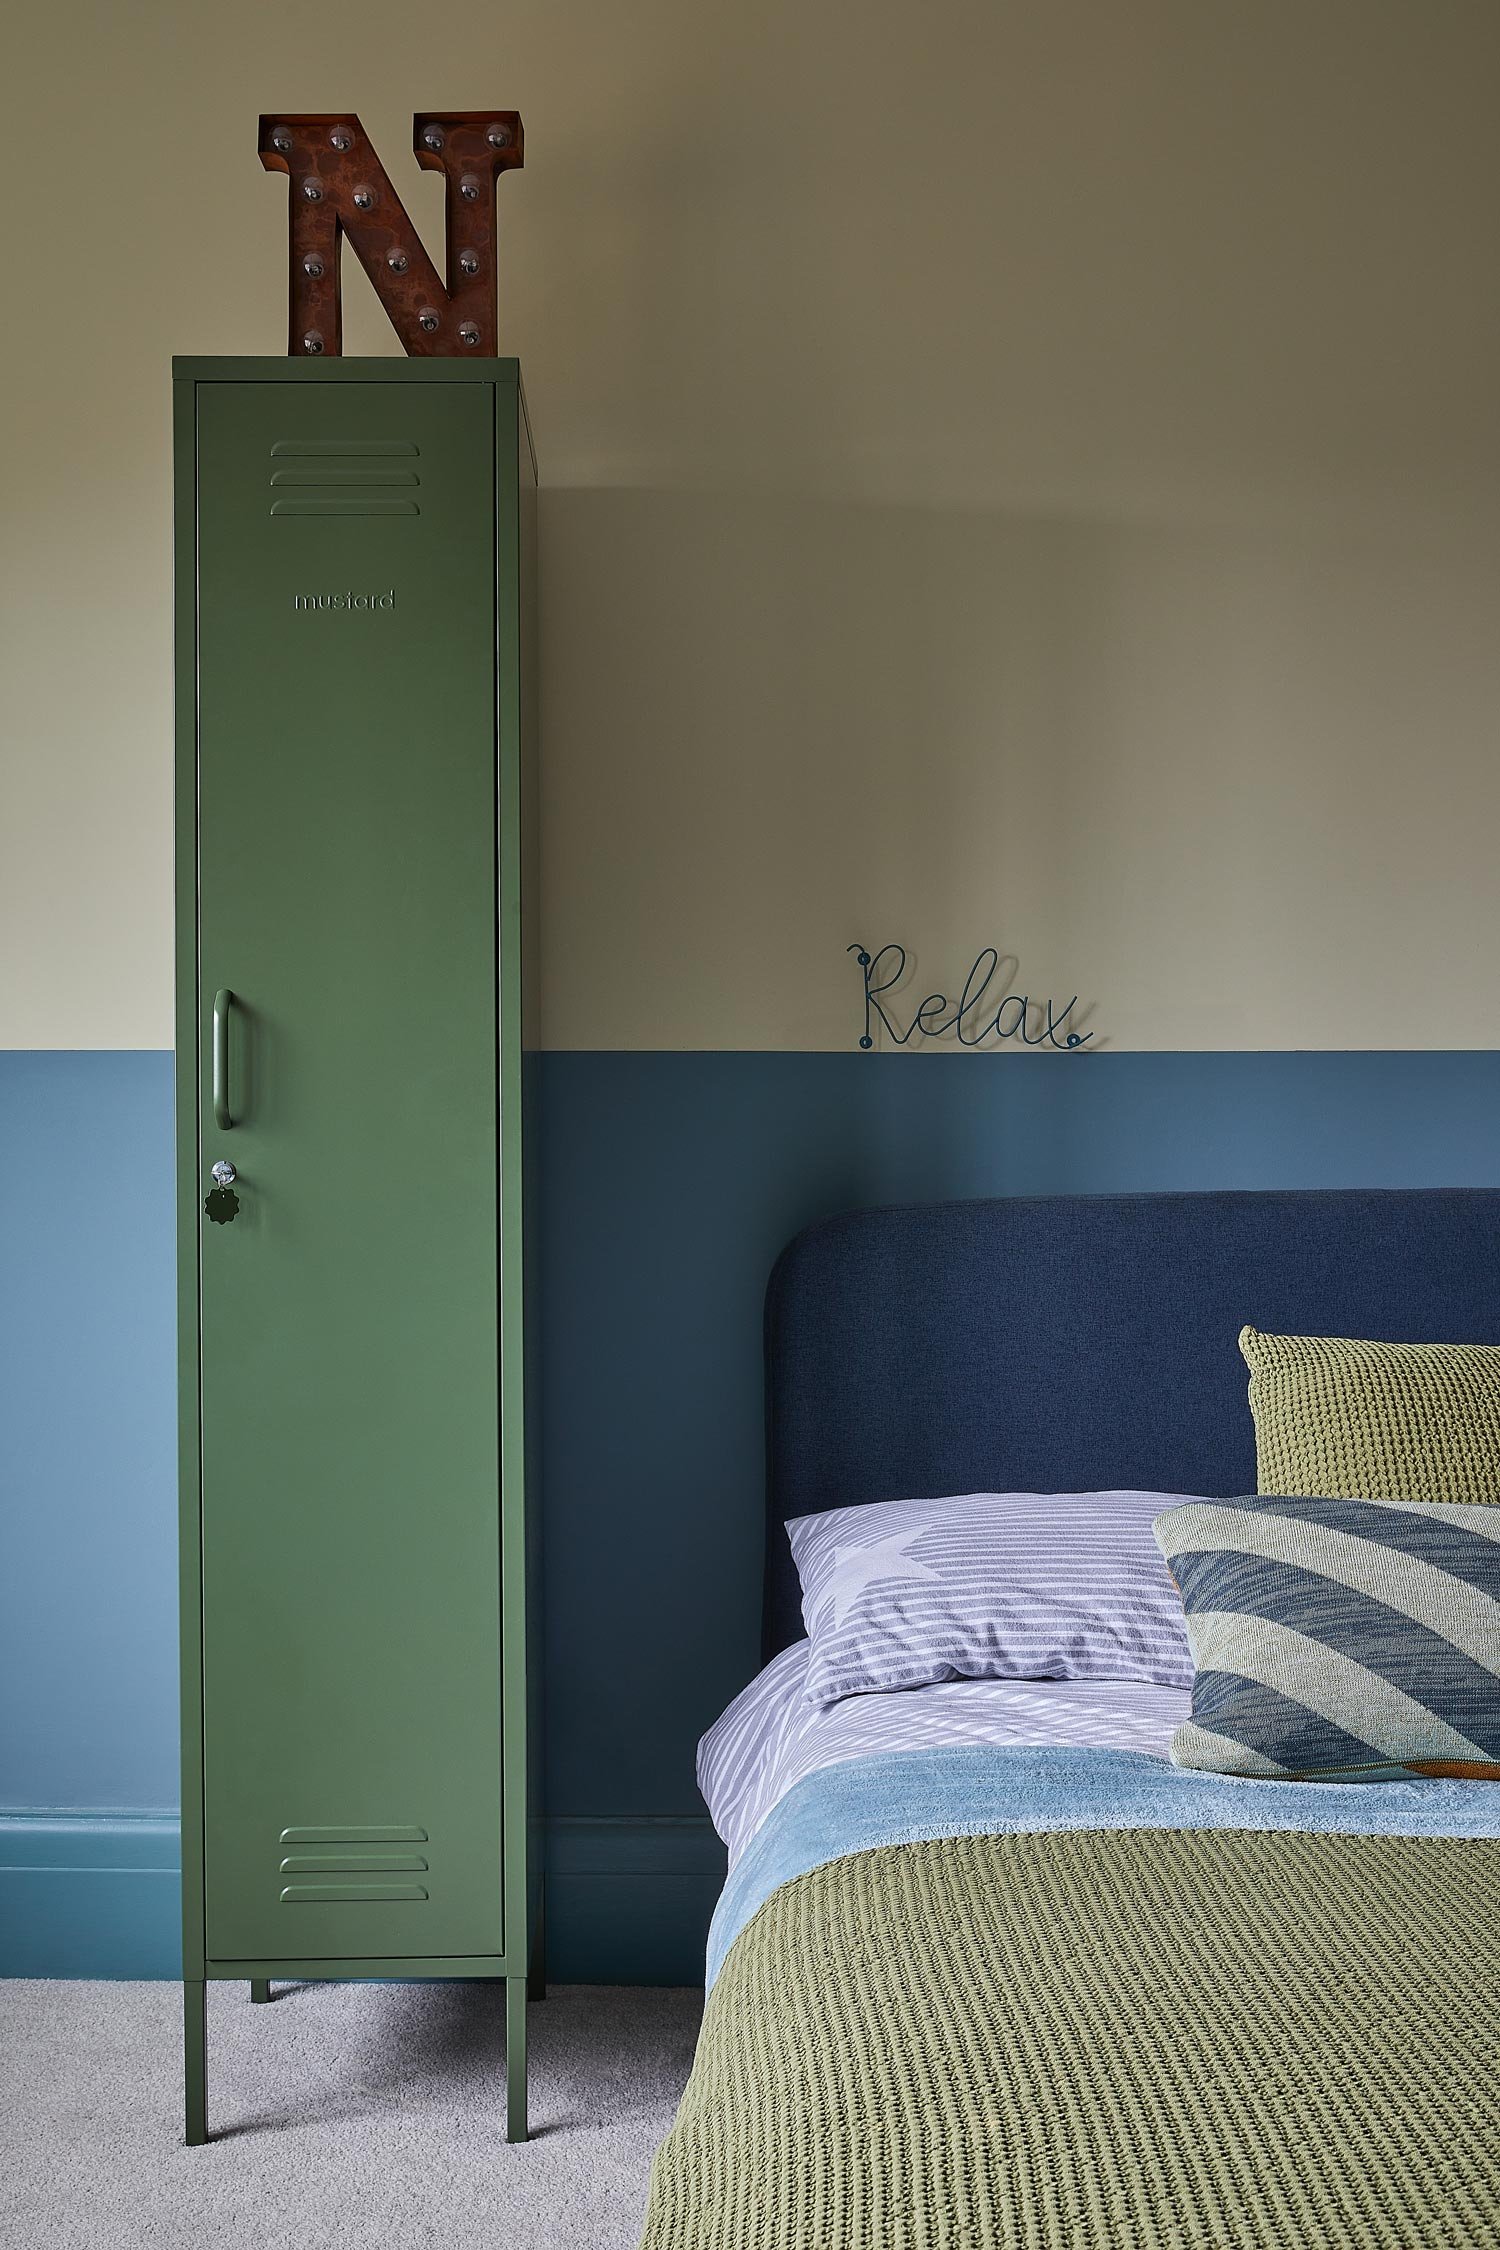 locker-room-style-green-cabinet-next-to-bed.jpg